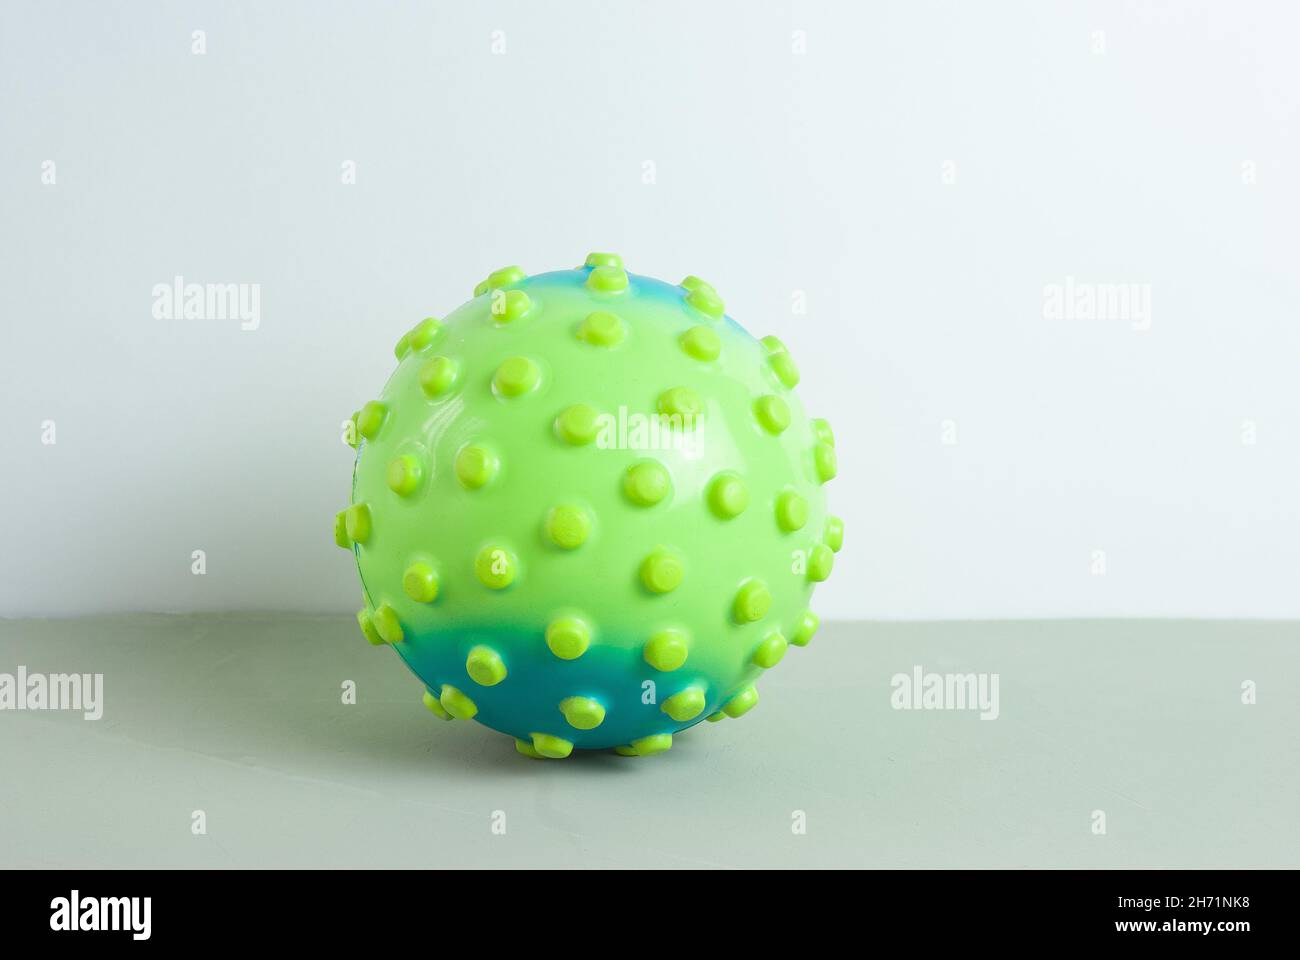 Childrens ball in the form of a virus on a gray background Stock Photo